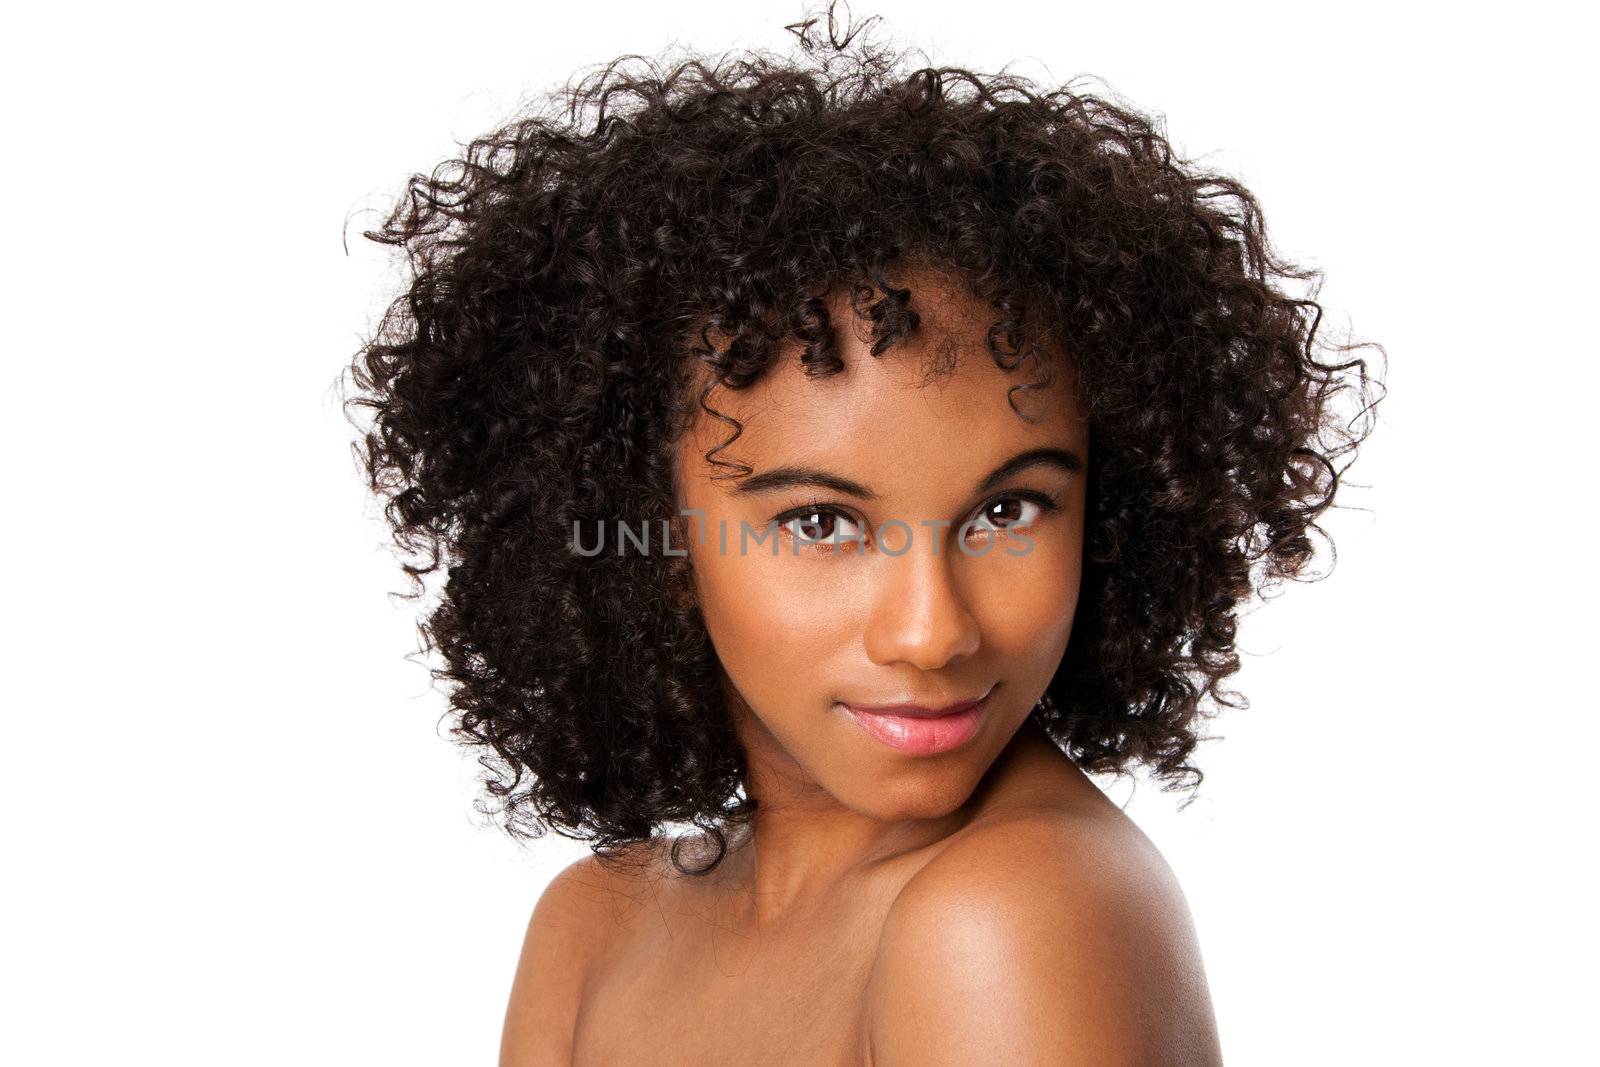 Beautiful happy female face with smooth skin and dark curly hair, isolated.